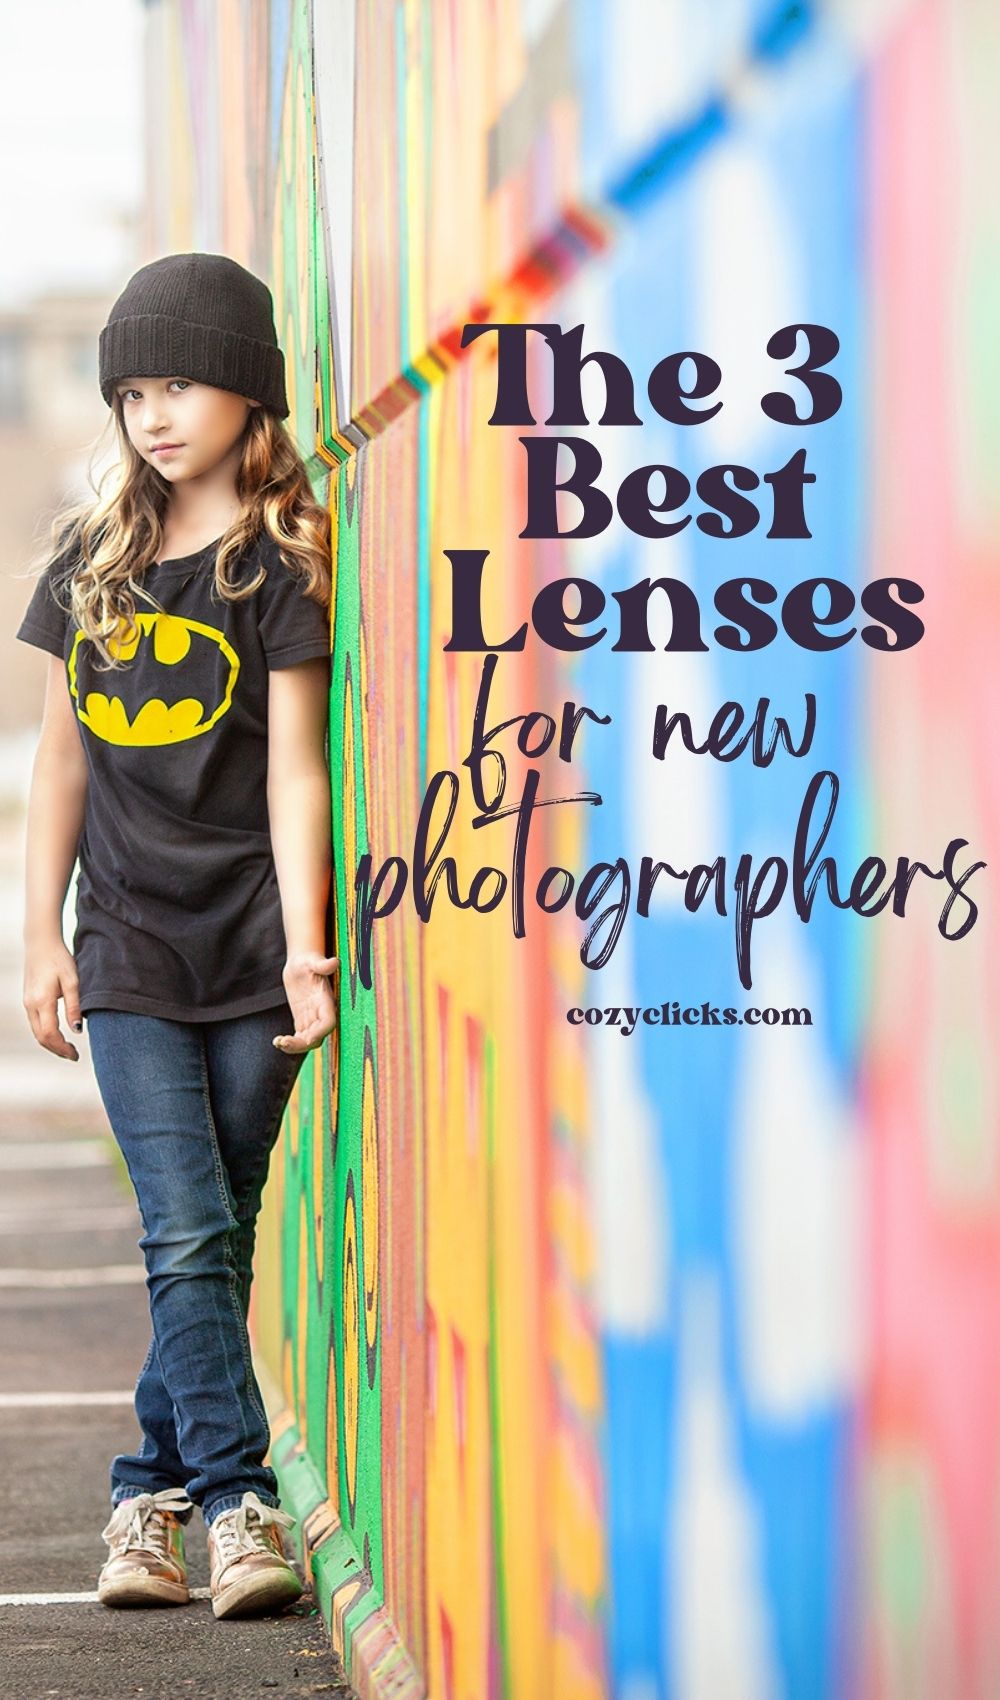 What lens should I buy?  This is a common question a lot of new photographers have.  Some lenses are better! Learn here what lens you should buy first as a new photographer to see change in your photos!